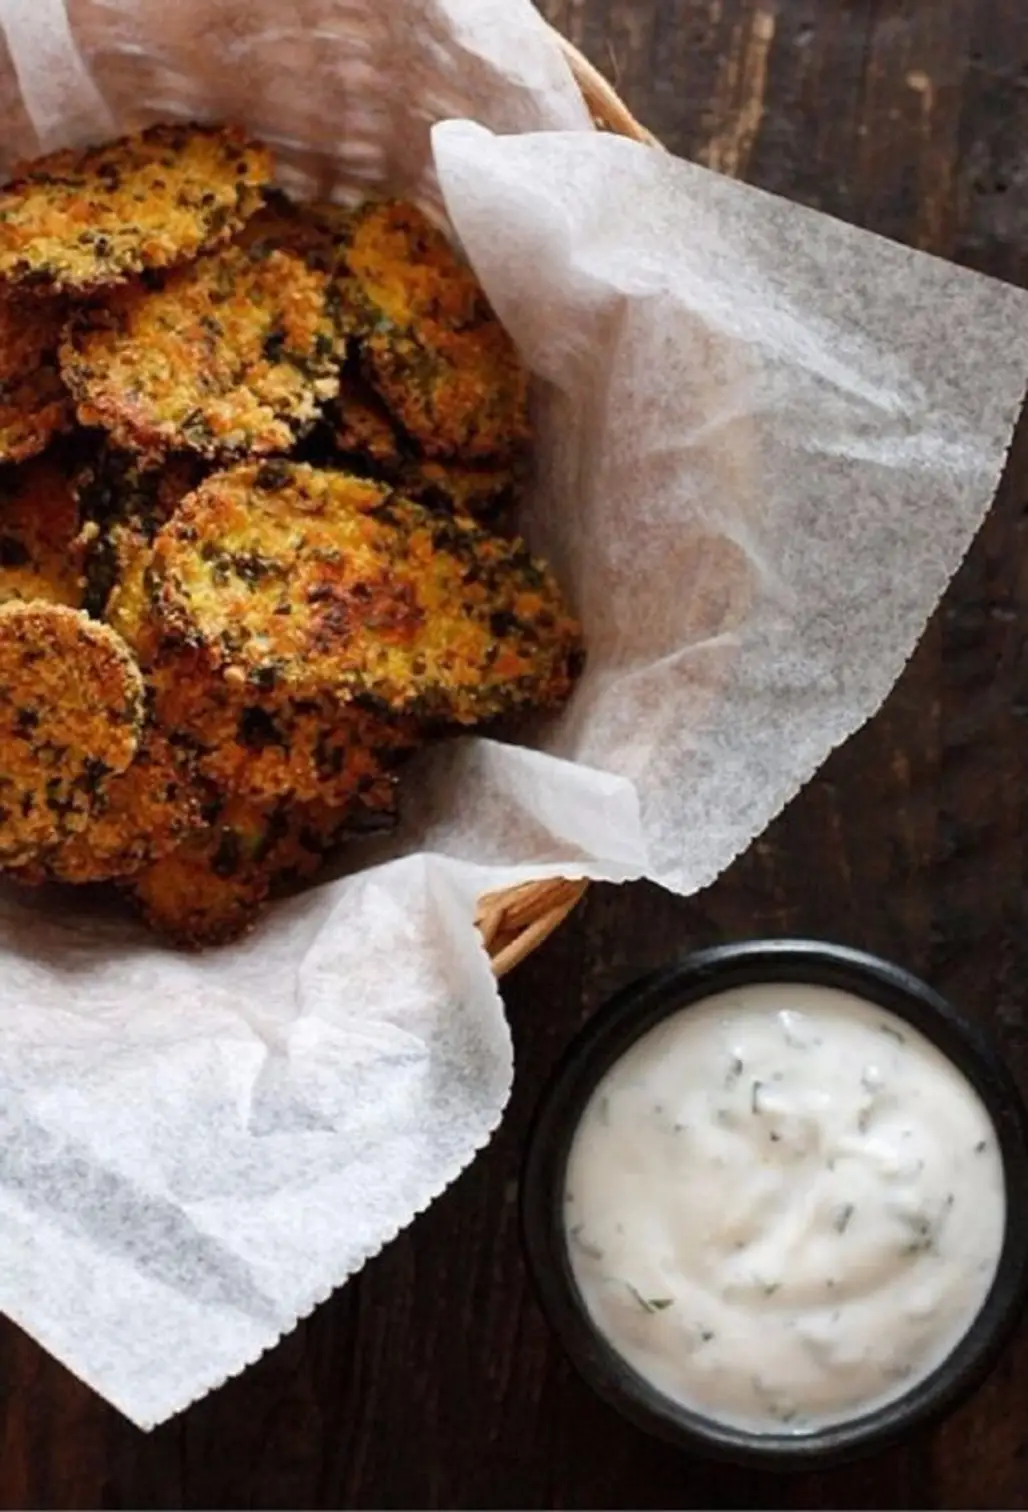 Oven “Fried” Pickles